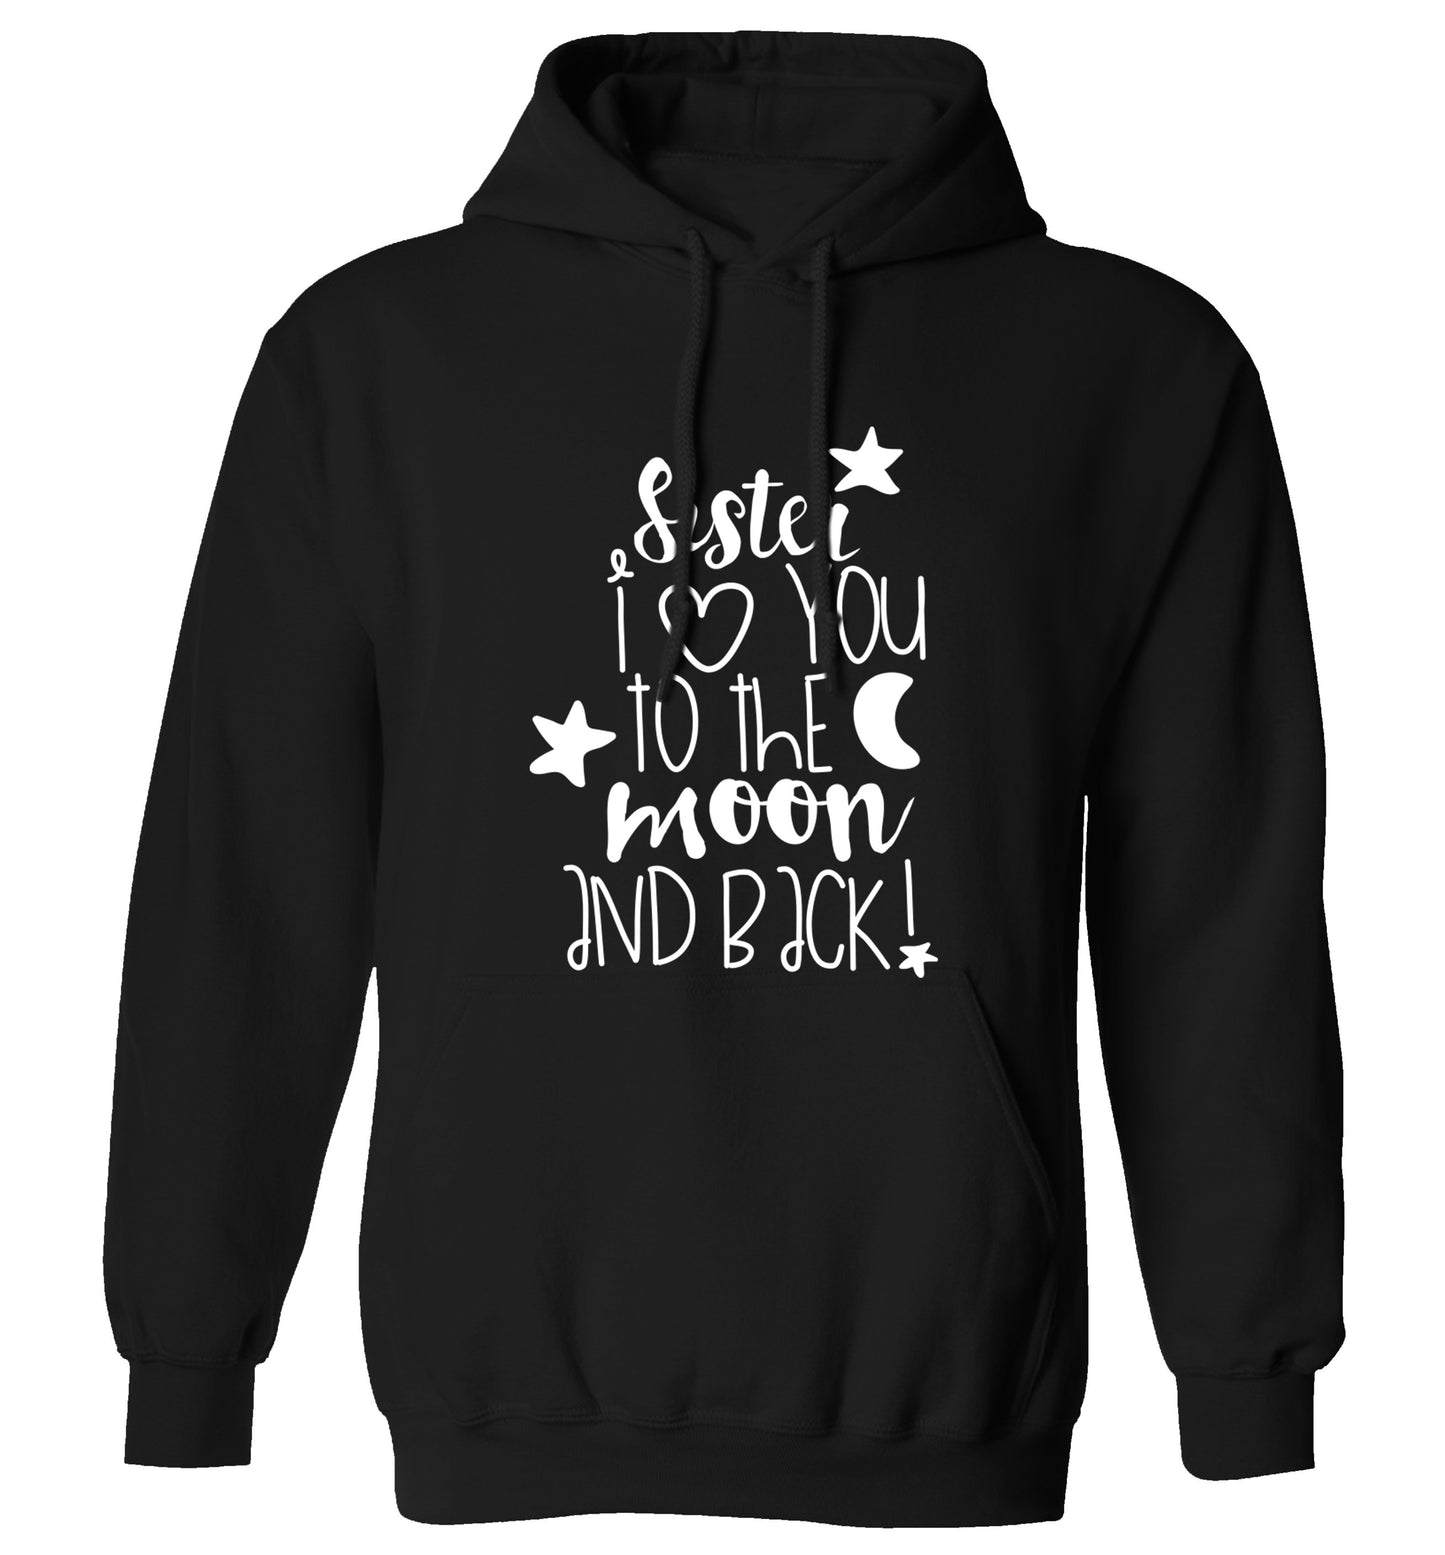 Sister I love you to the moon and back adults unisex black hoodie 2XL